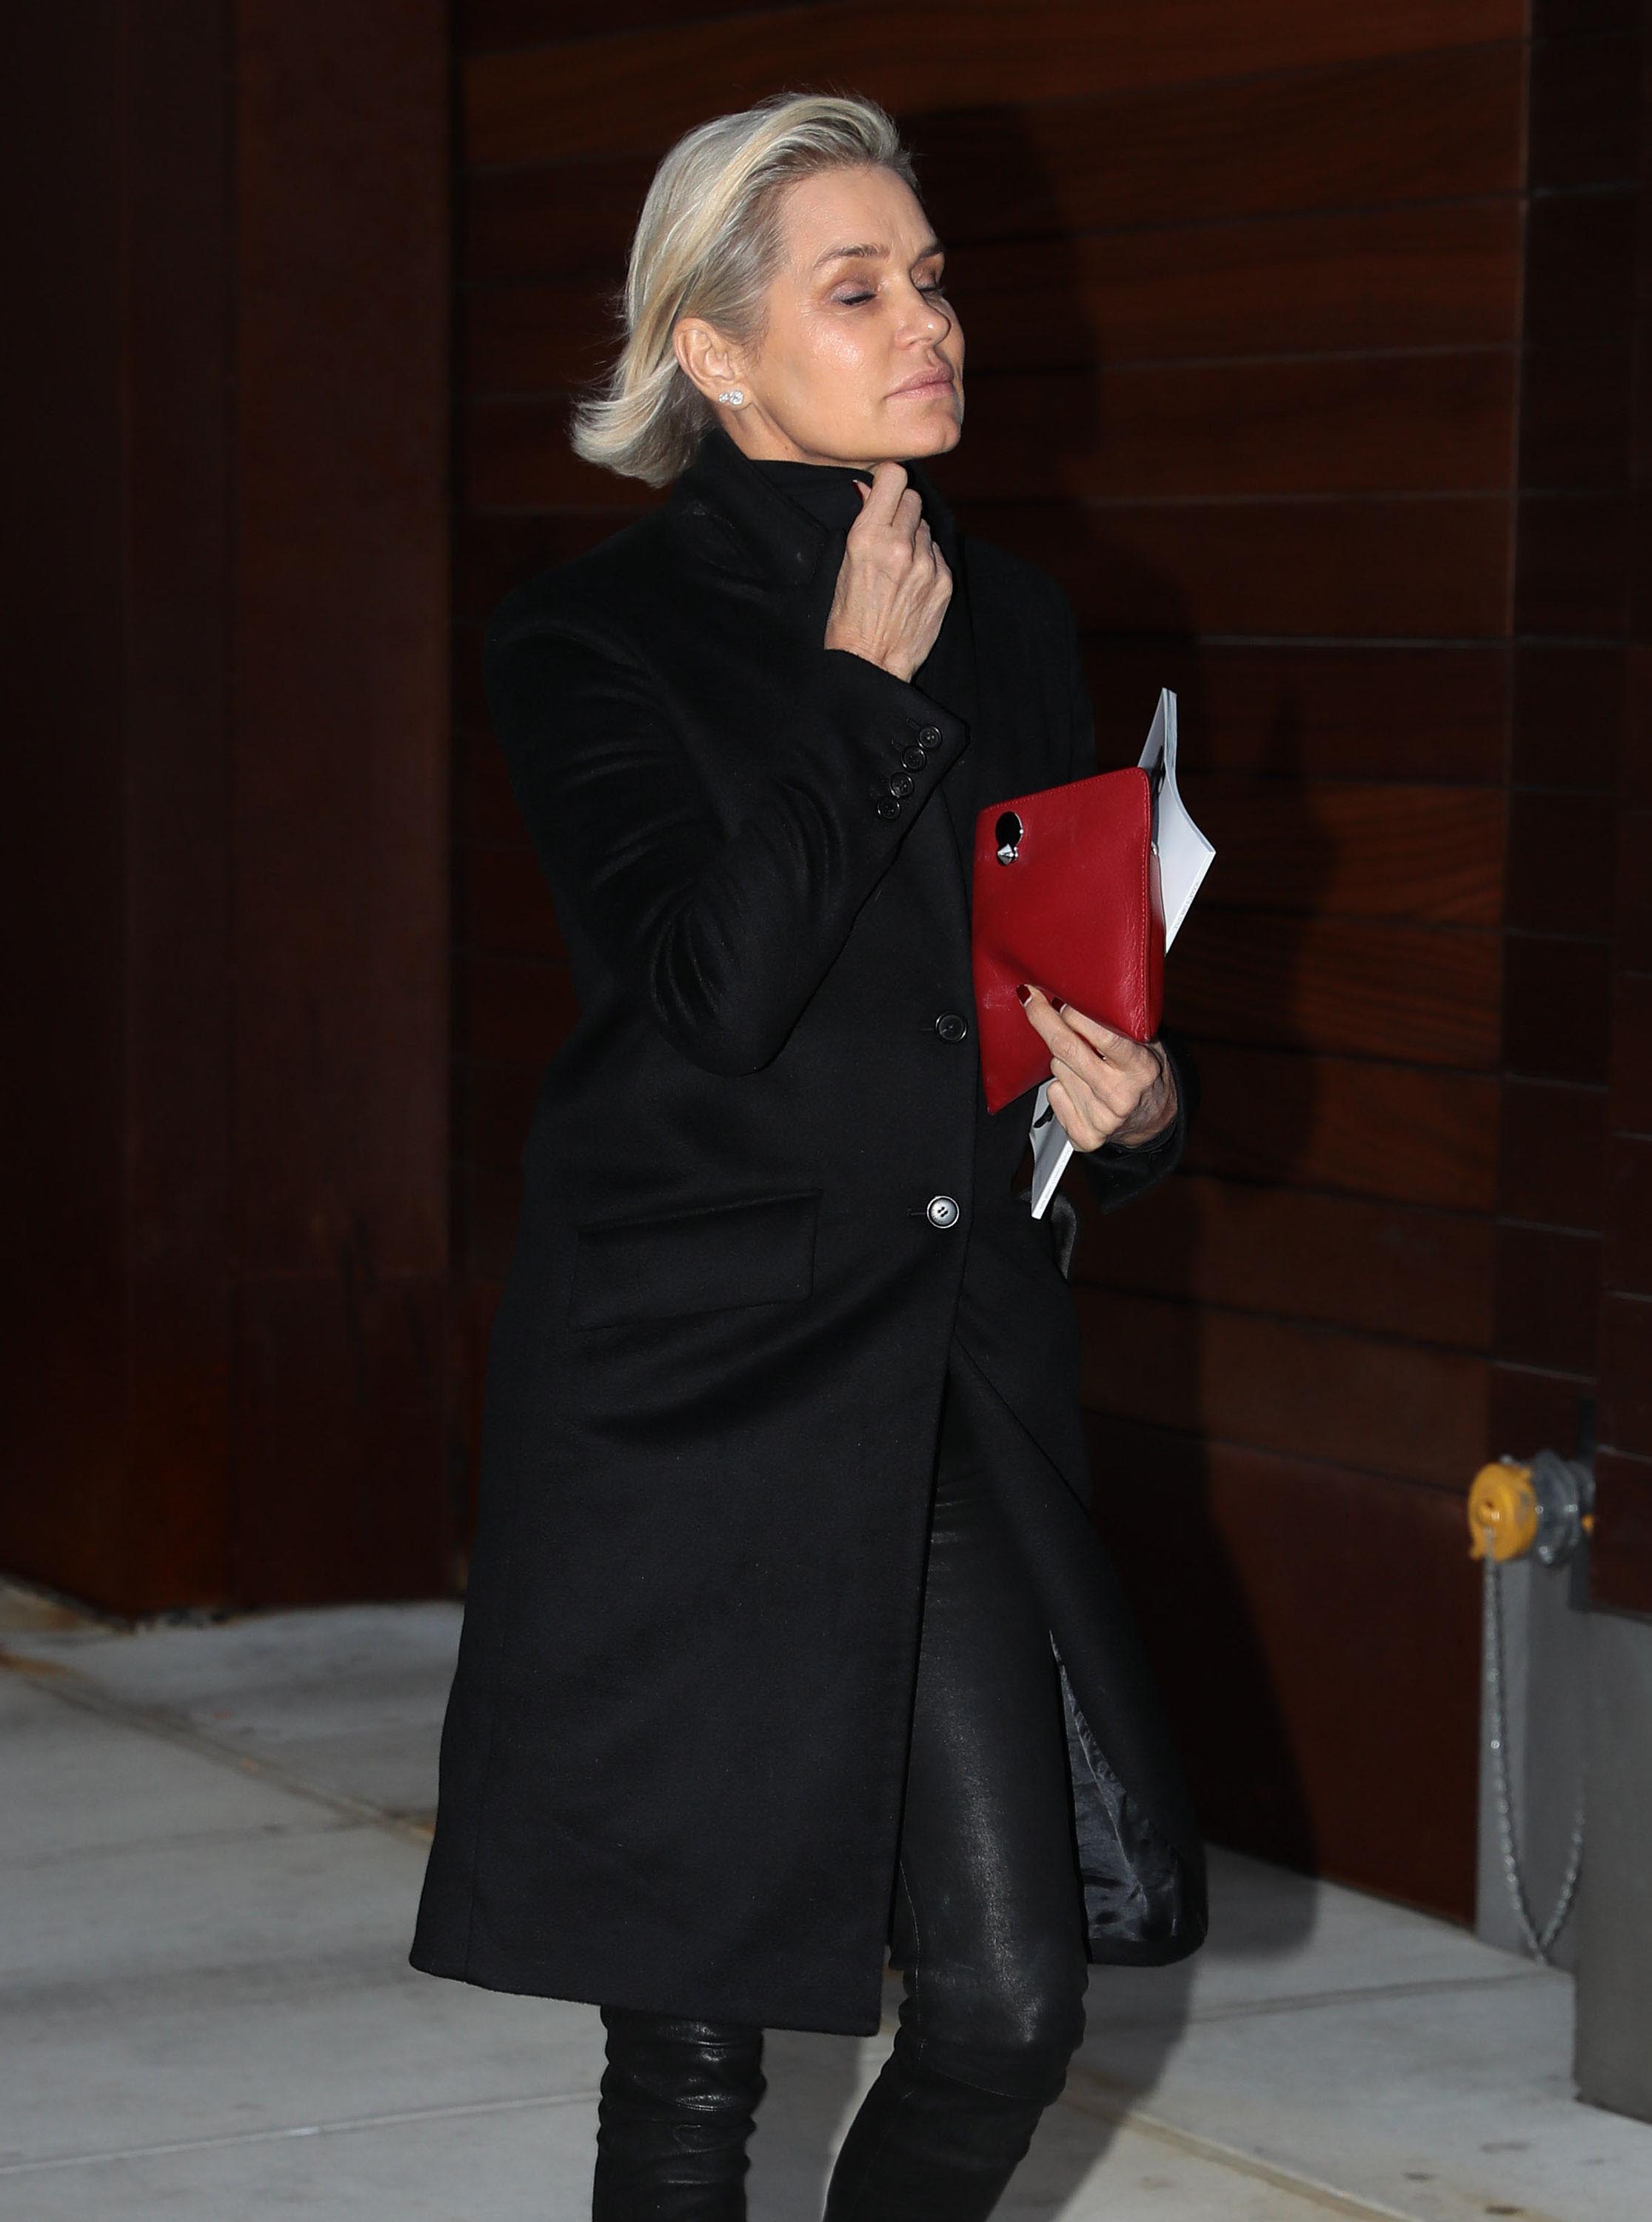 Yolanda Hadid is spotted out and about in NYC